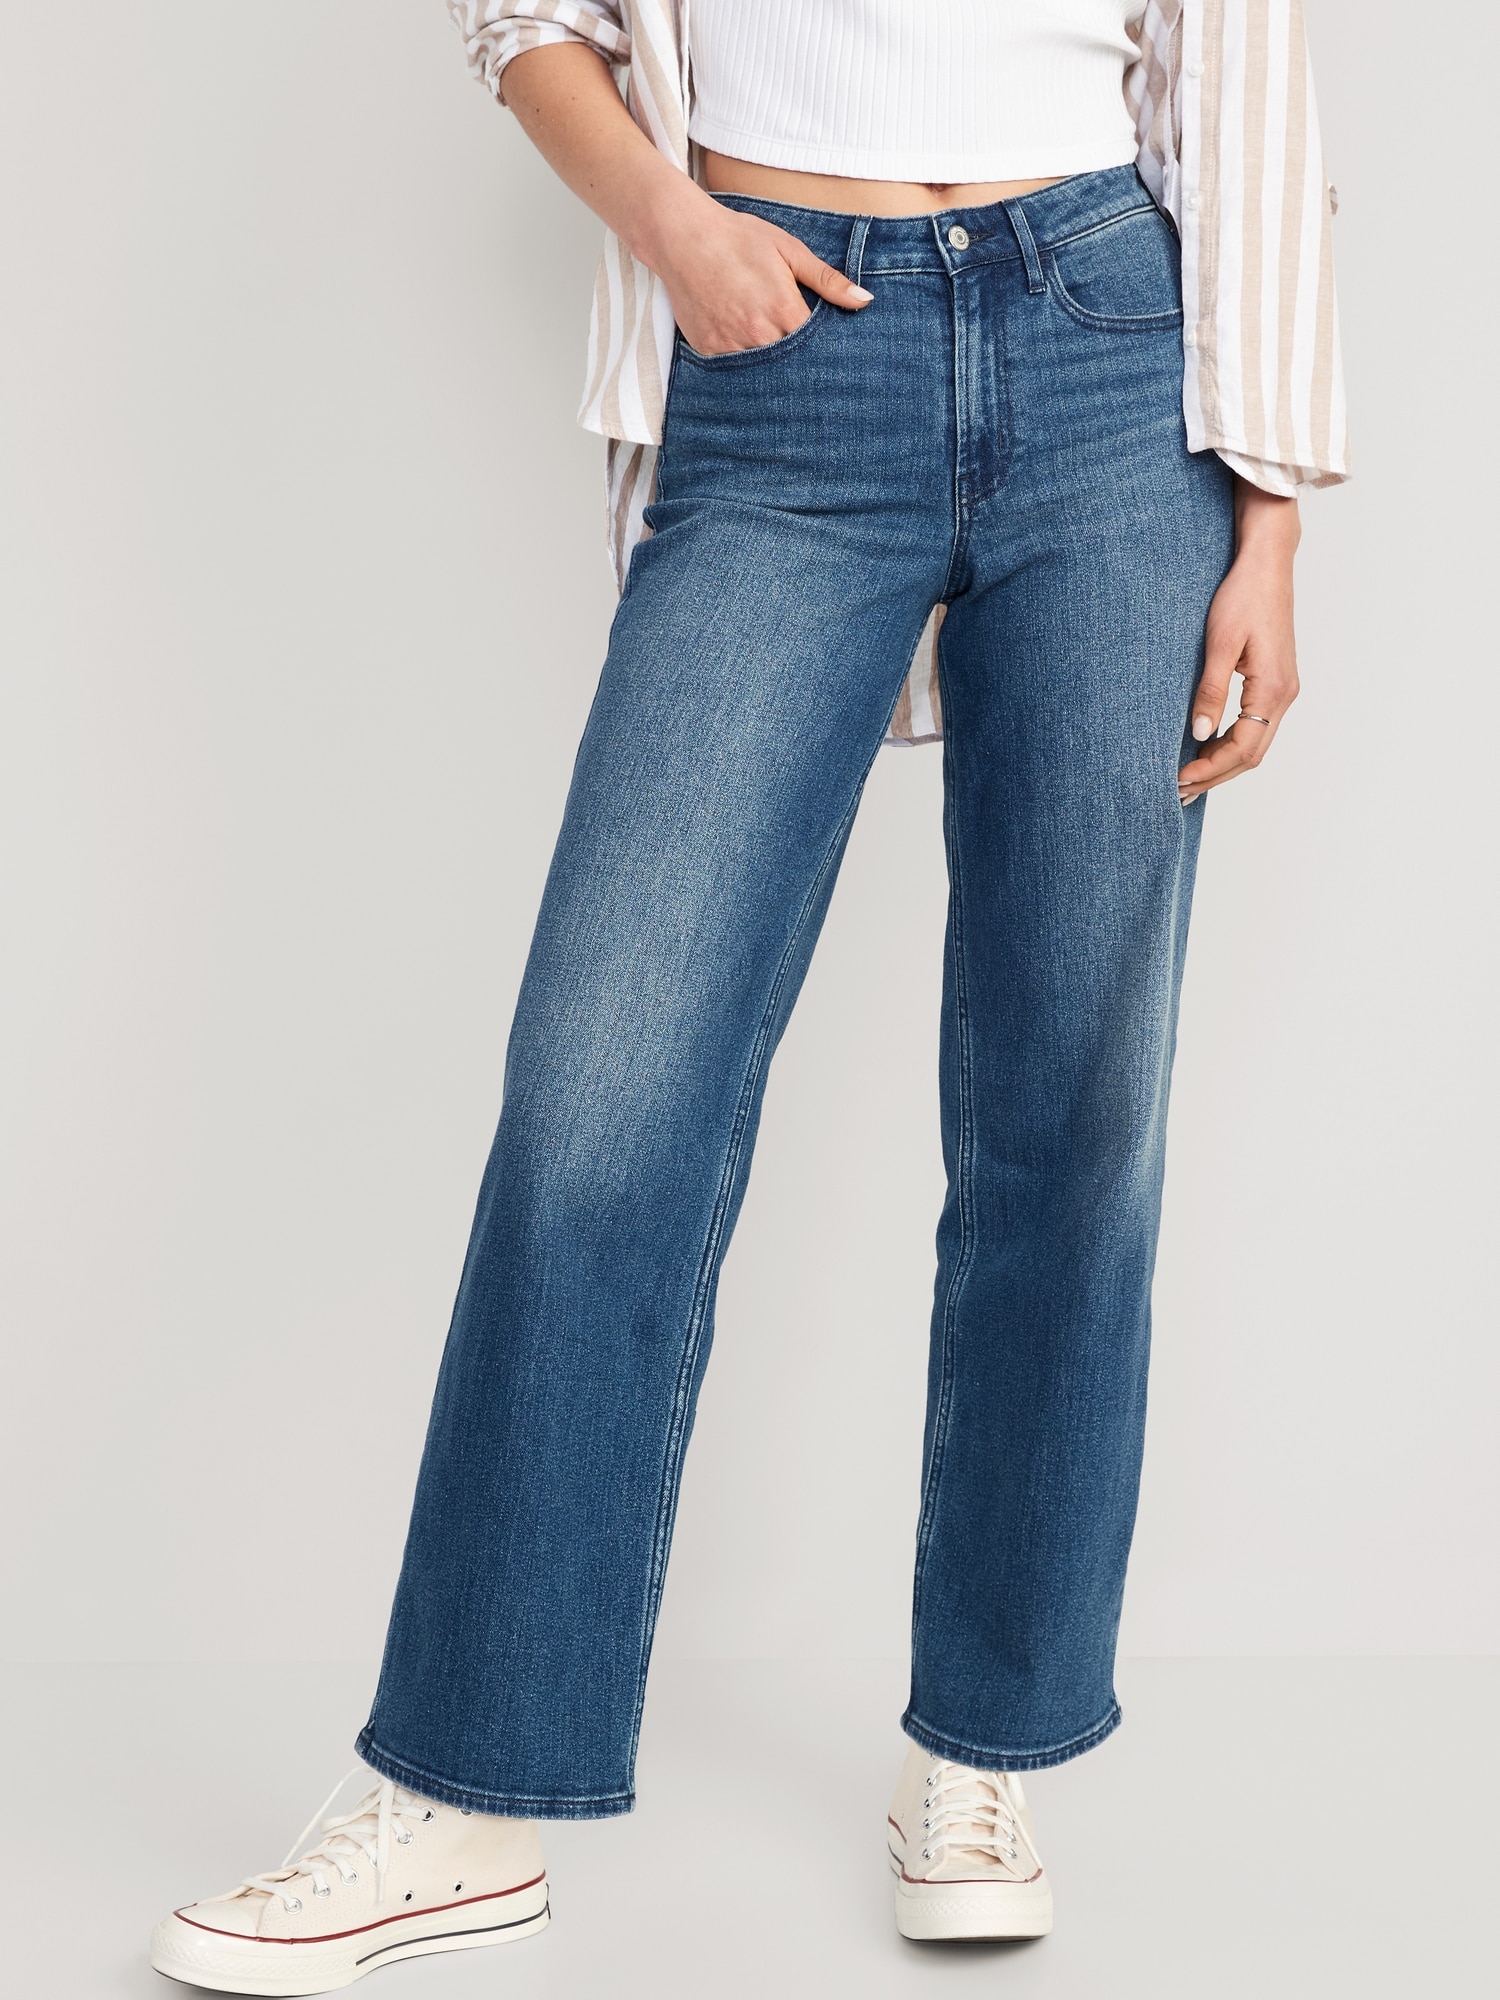 Buy Old Navy Jeans Online In India  Etsy India